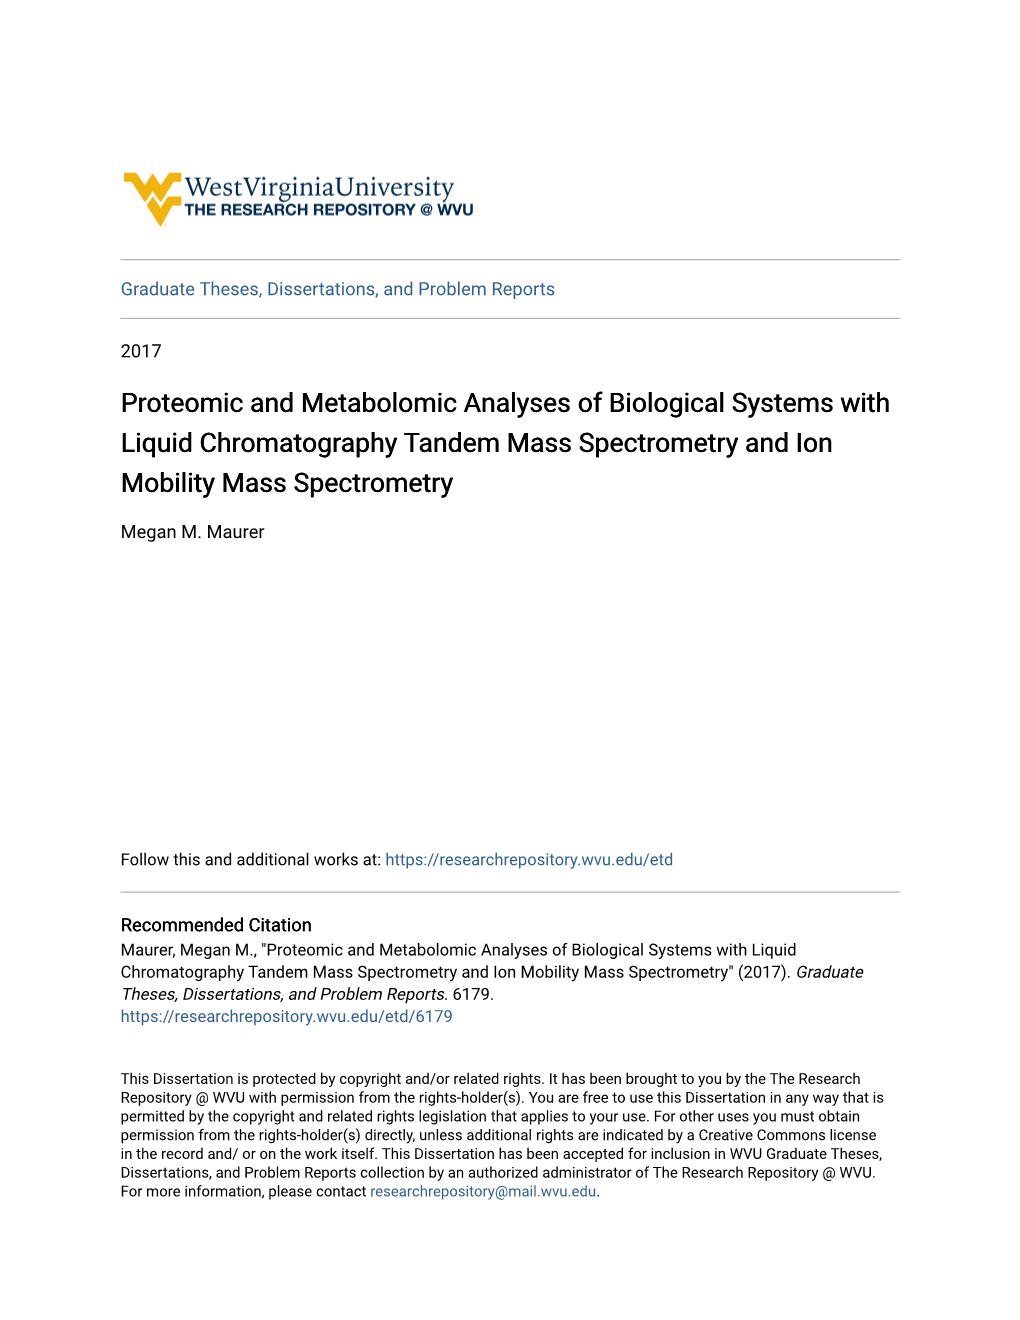 Proteomic and Metabolomic Analyses of Biological Systems with Liquid Chromatography Tandem Mass Spectrometry and Ion Mobility Mass Spectrometry